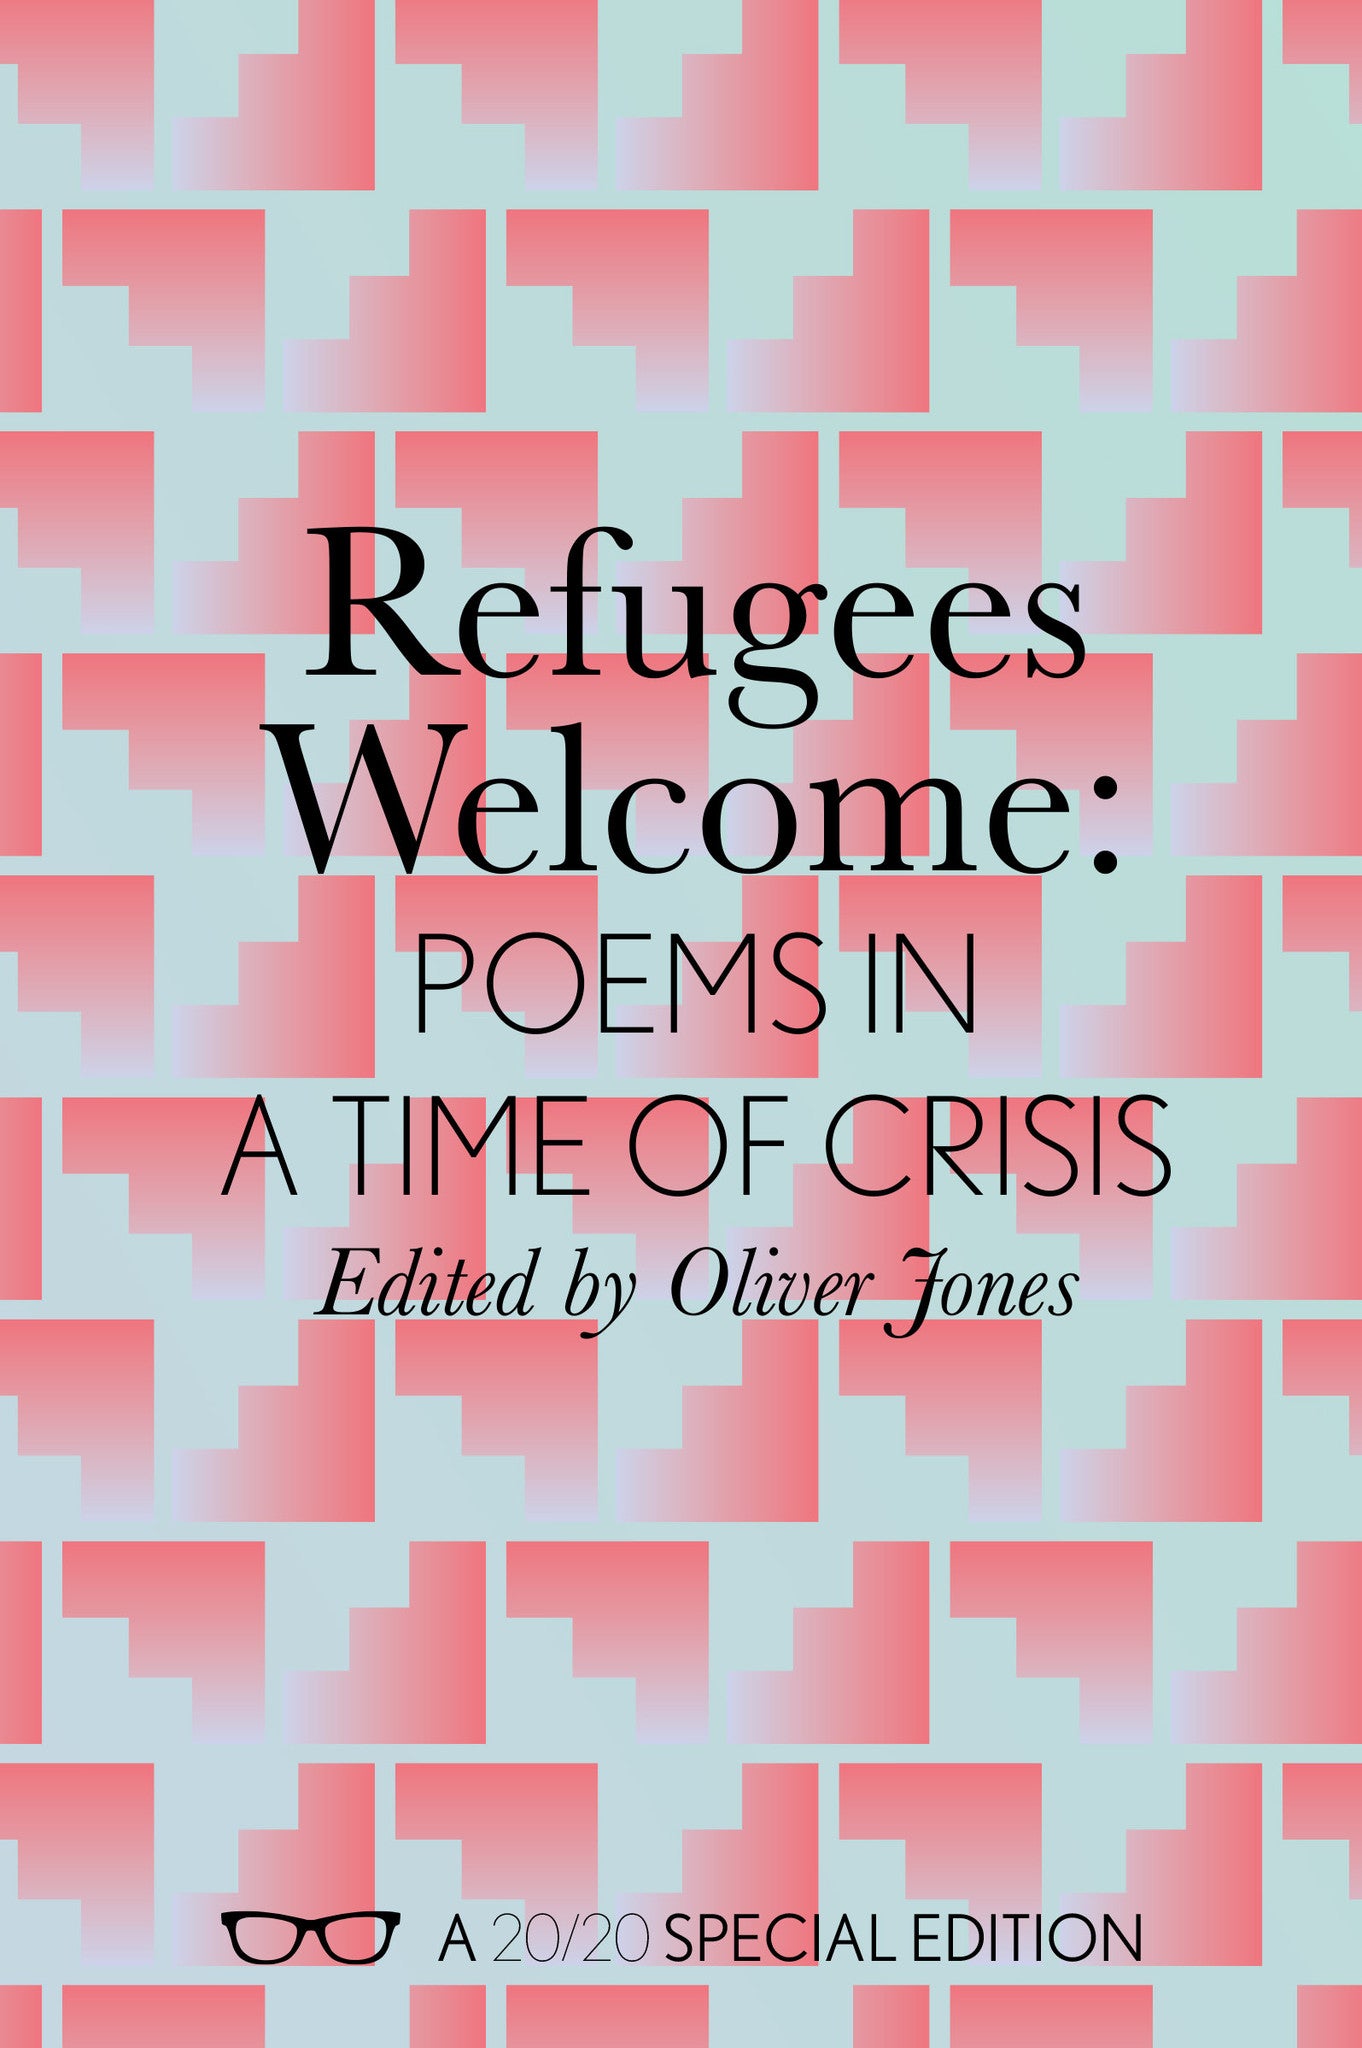 Refugees Welcome: Poems in a Time of Crisis